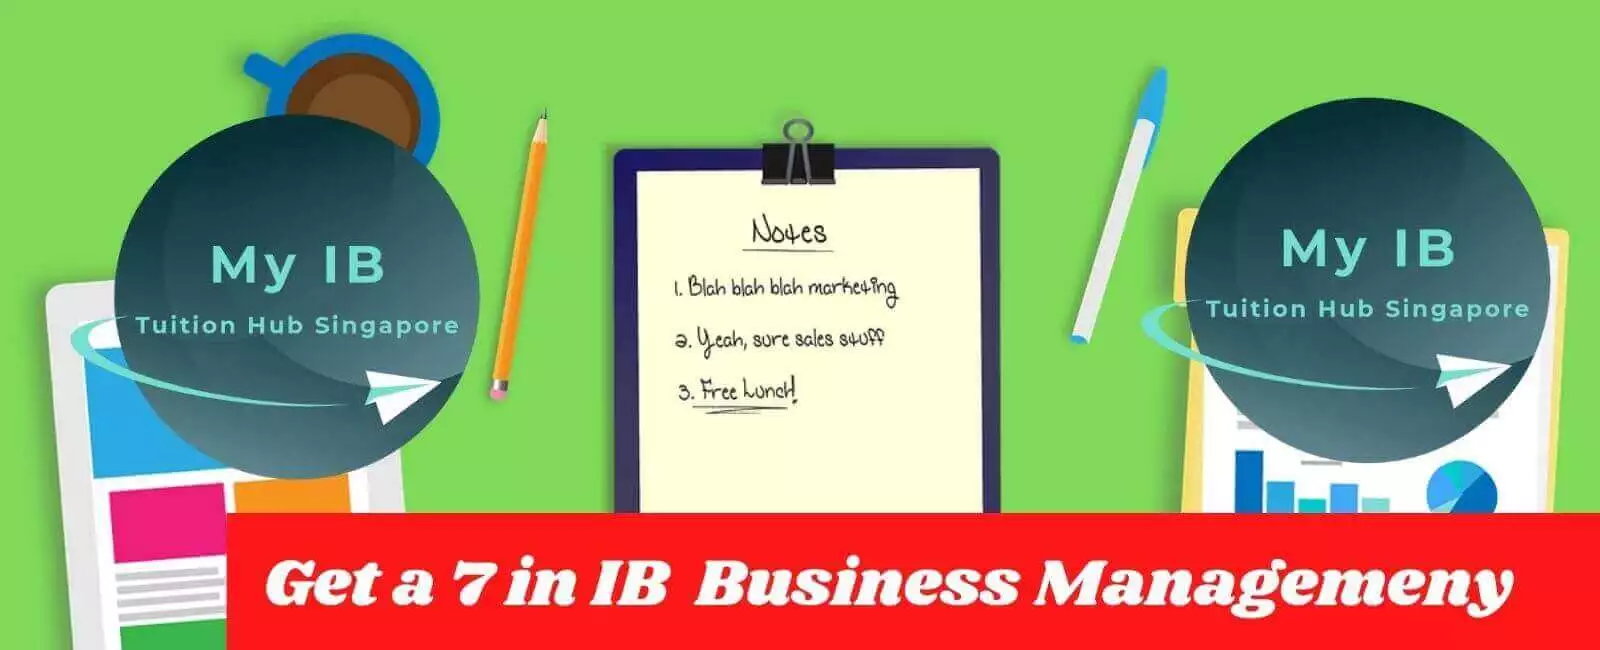 Get a 7 in IB Business Managemeny